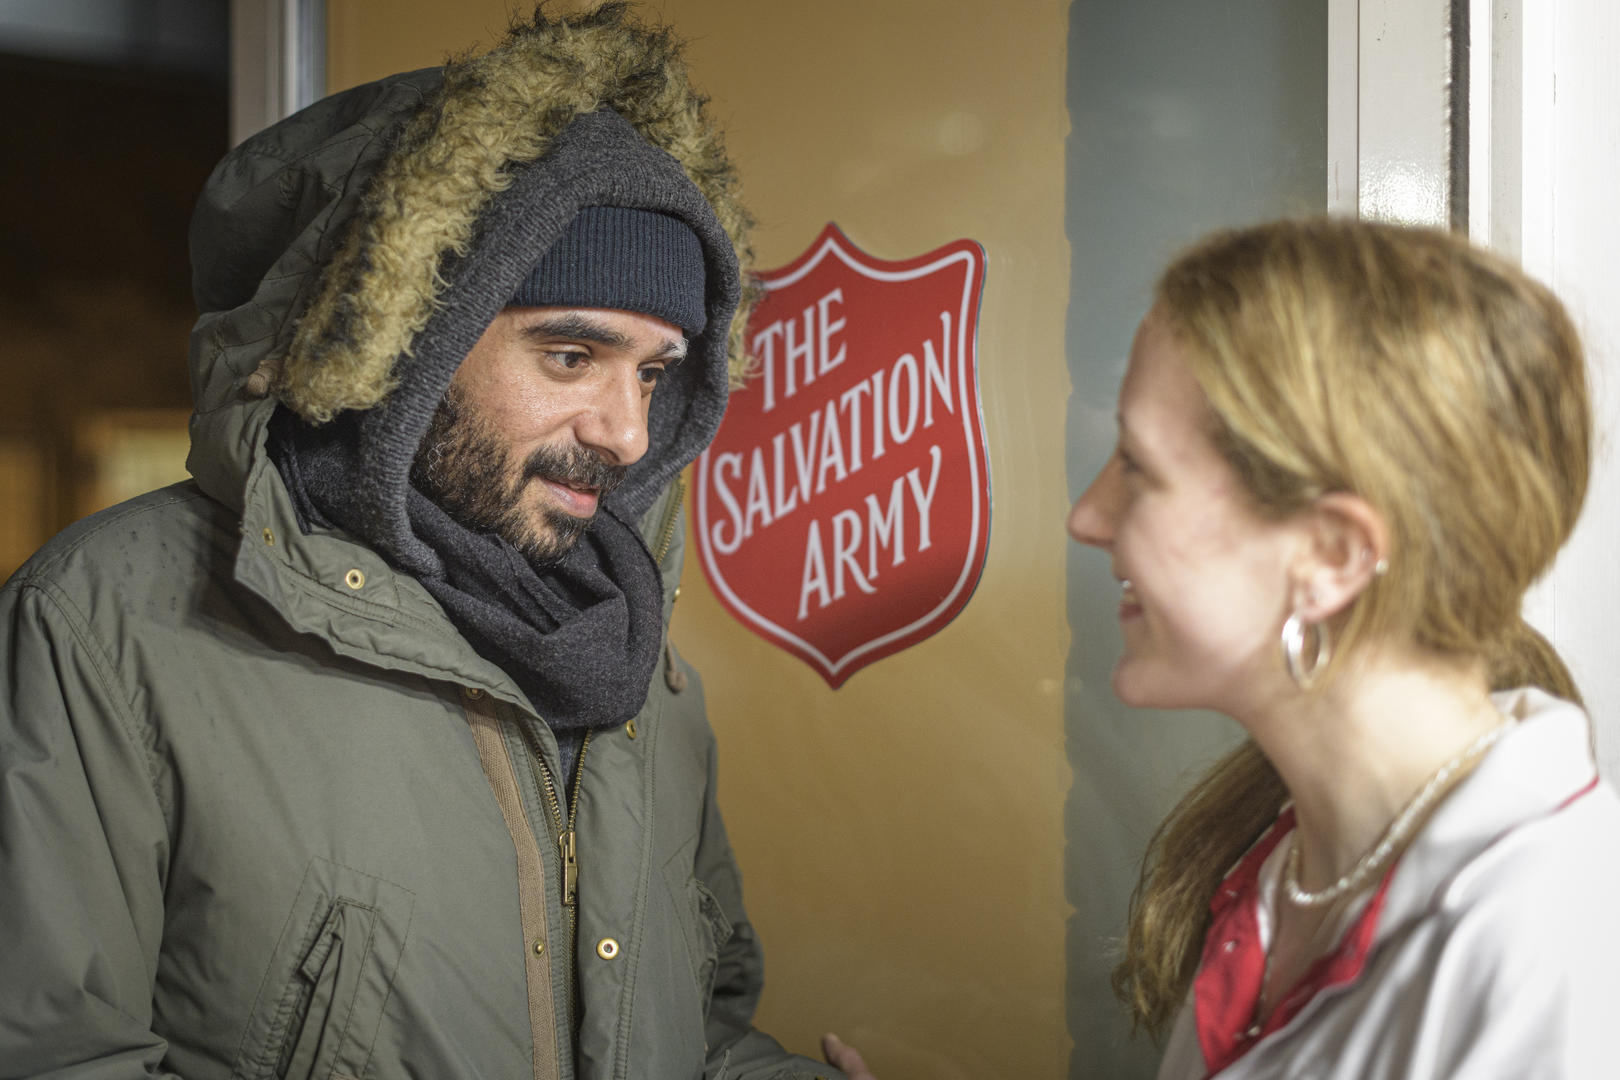 Salvation Army officer welcoming a homeless person into a Salvation Army centre